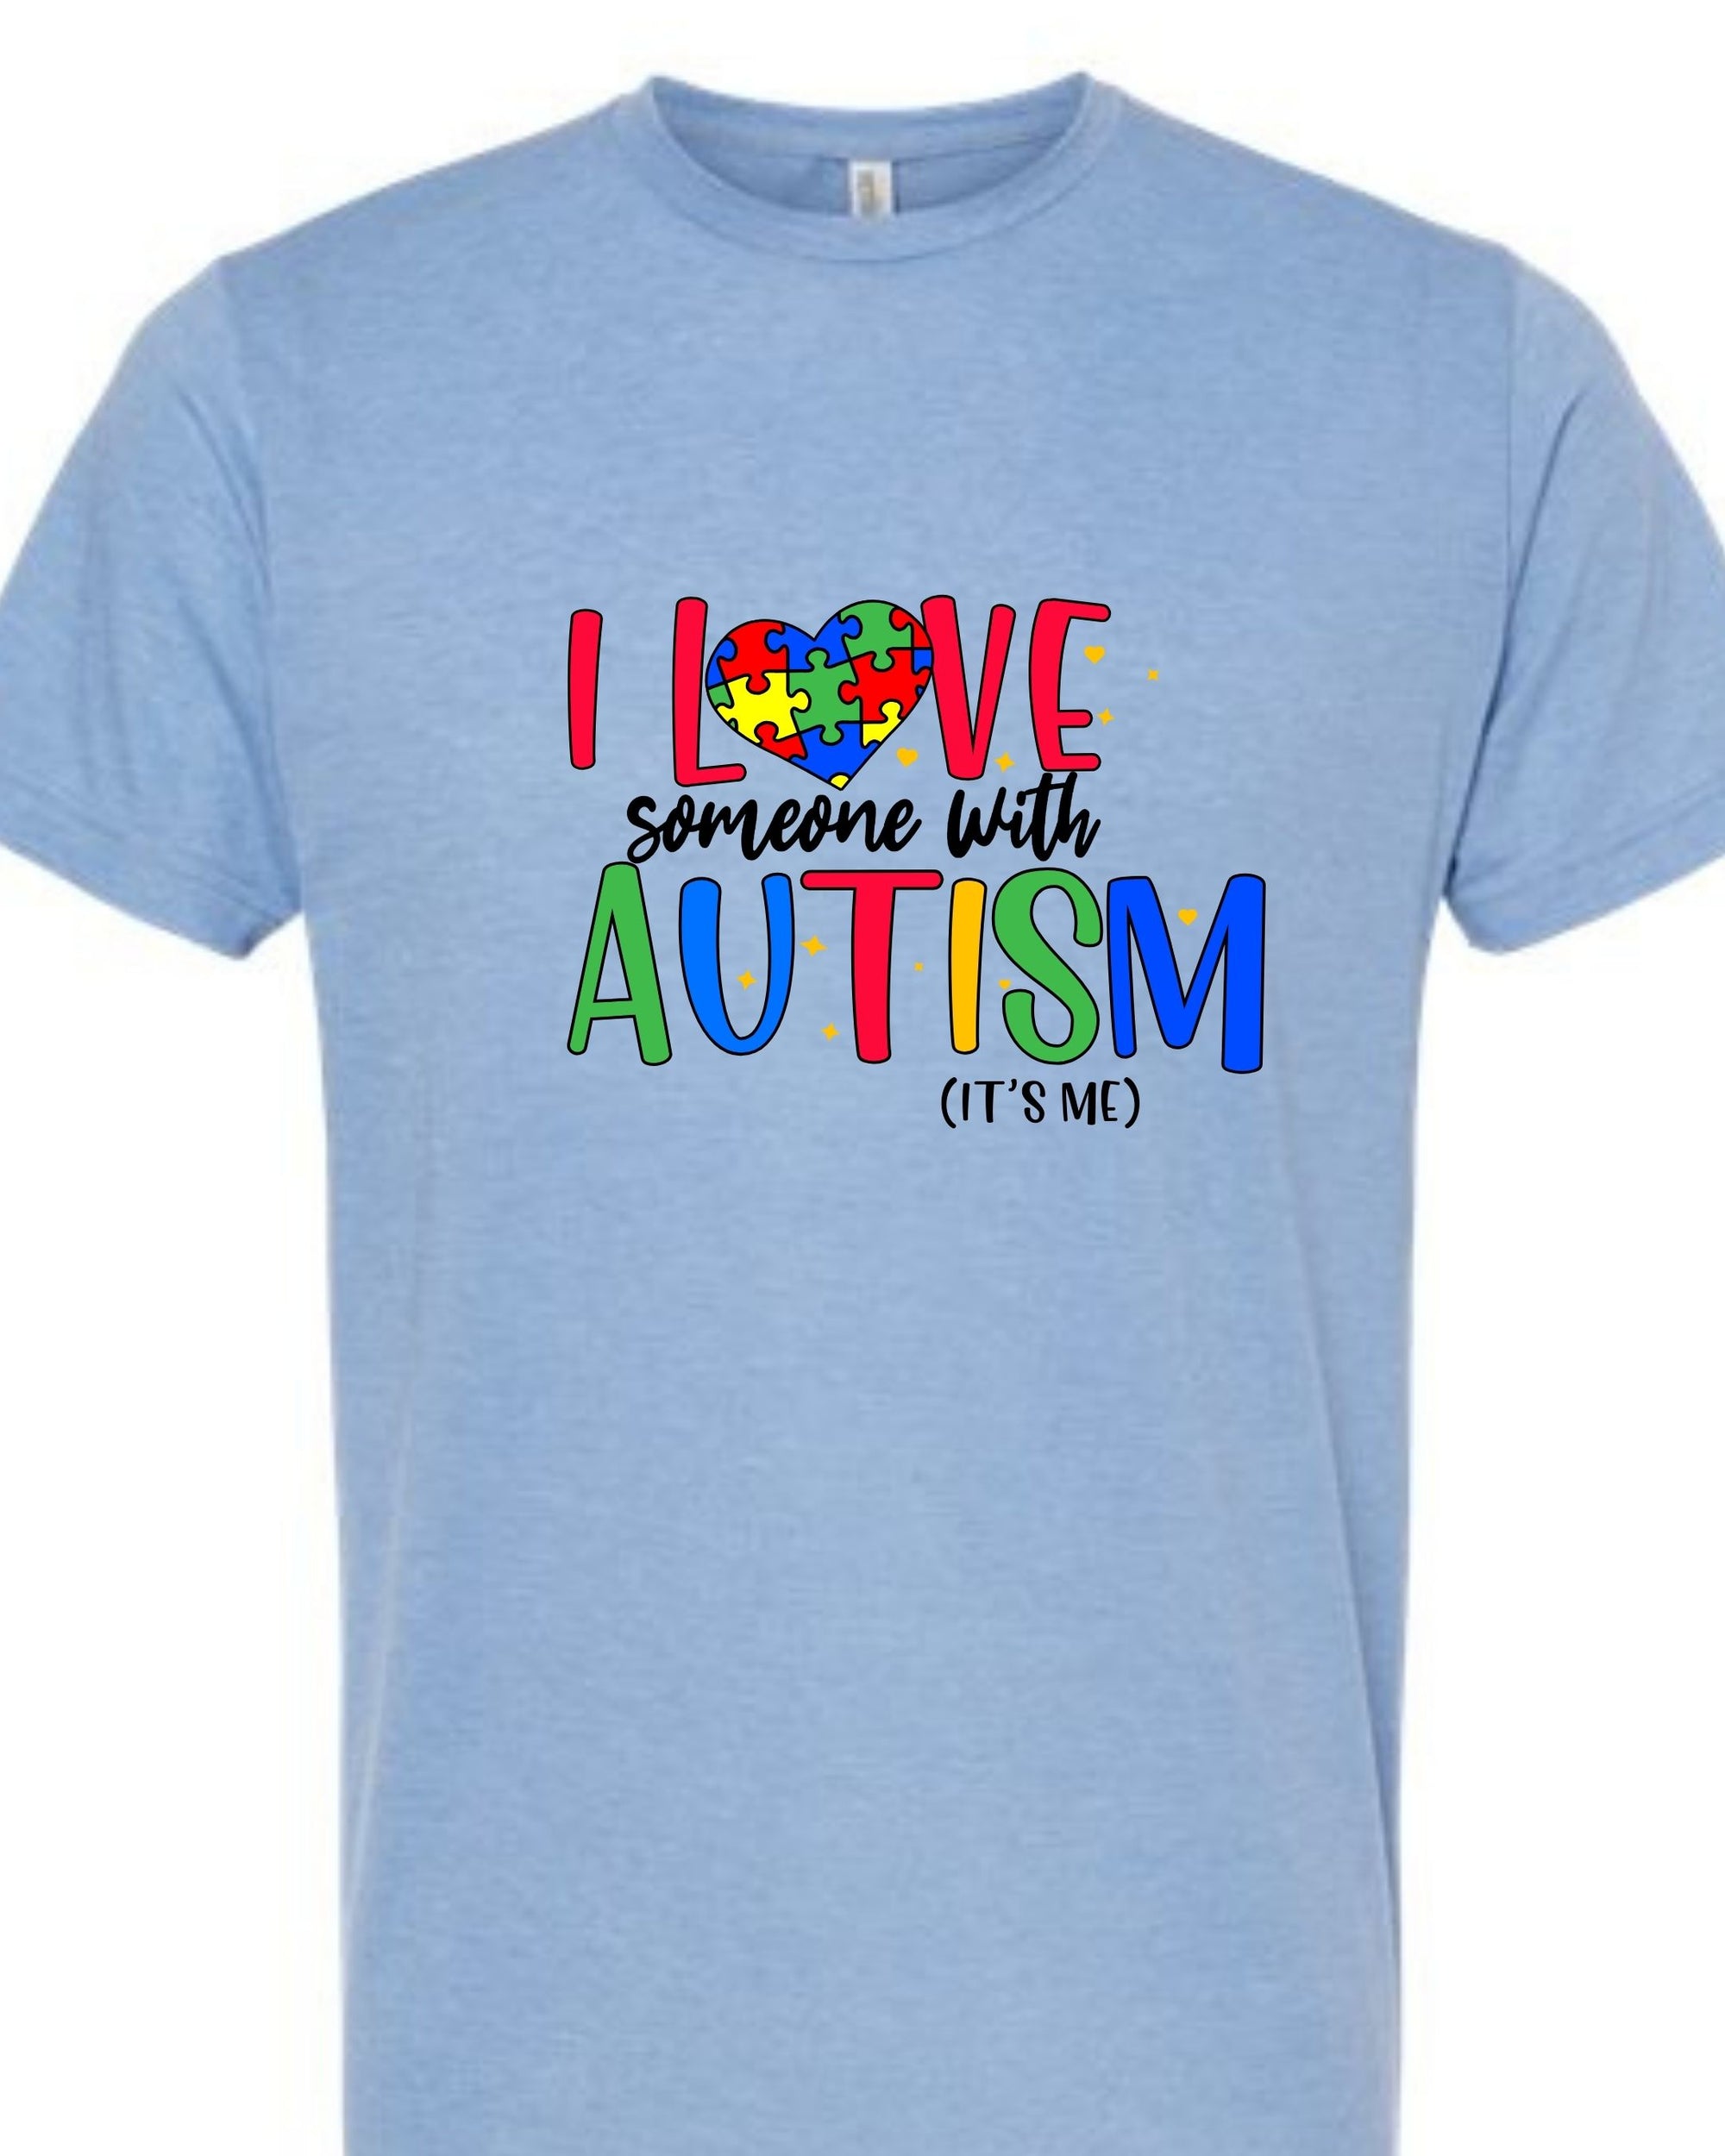 I Love Someone with Autism, It's Me - Blue, White or Black | Adult + Youth